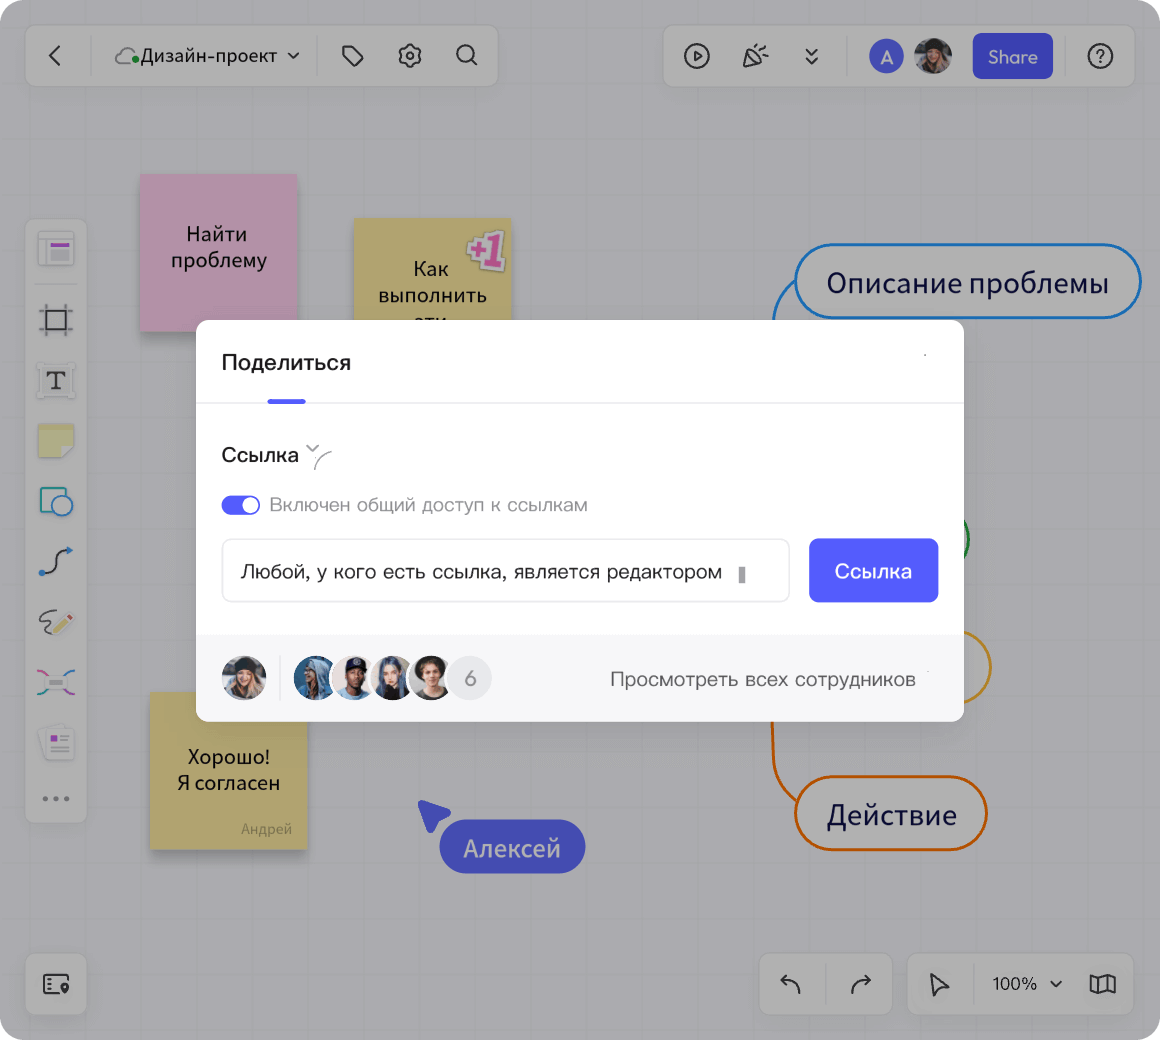 Map Out & Organize Ideas on Infinite Canvas